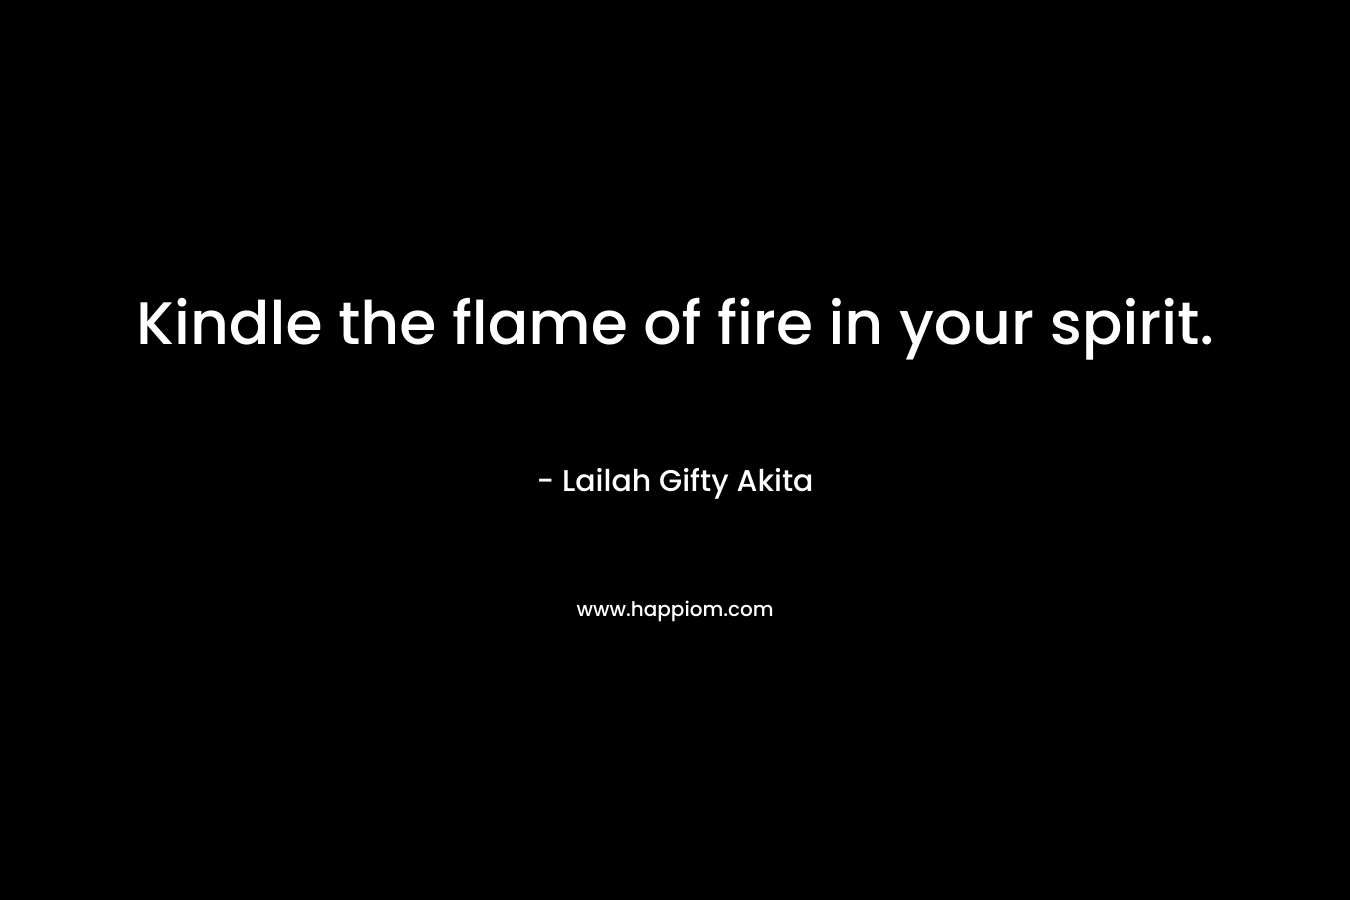 Kindle the flame of fire in your spirit.